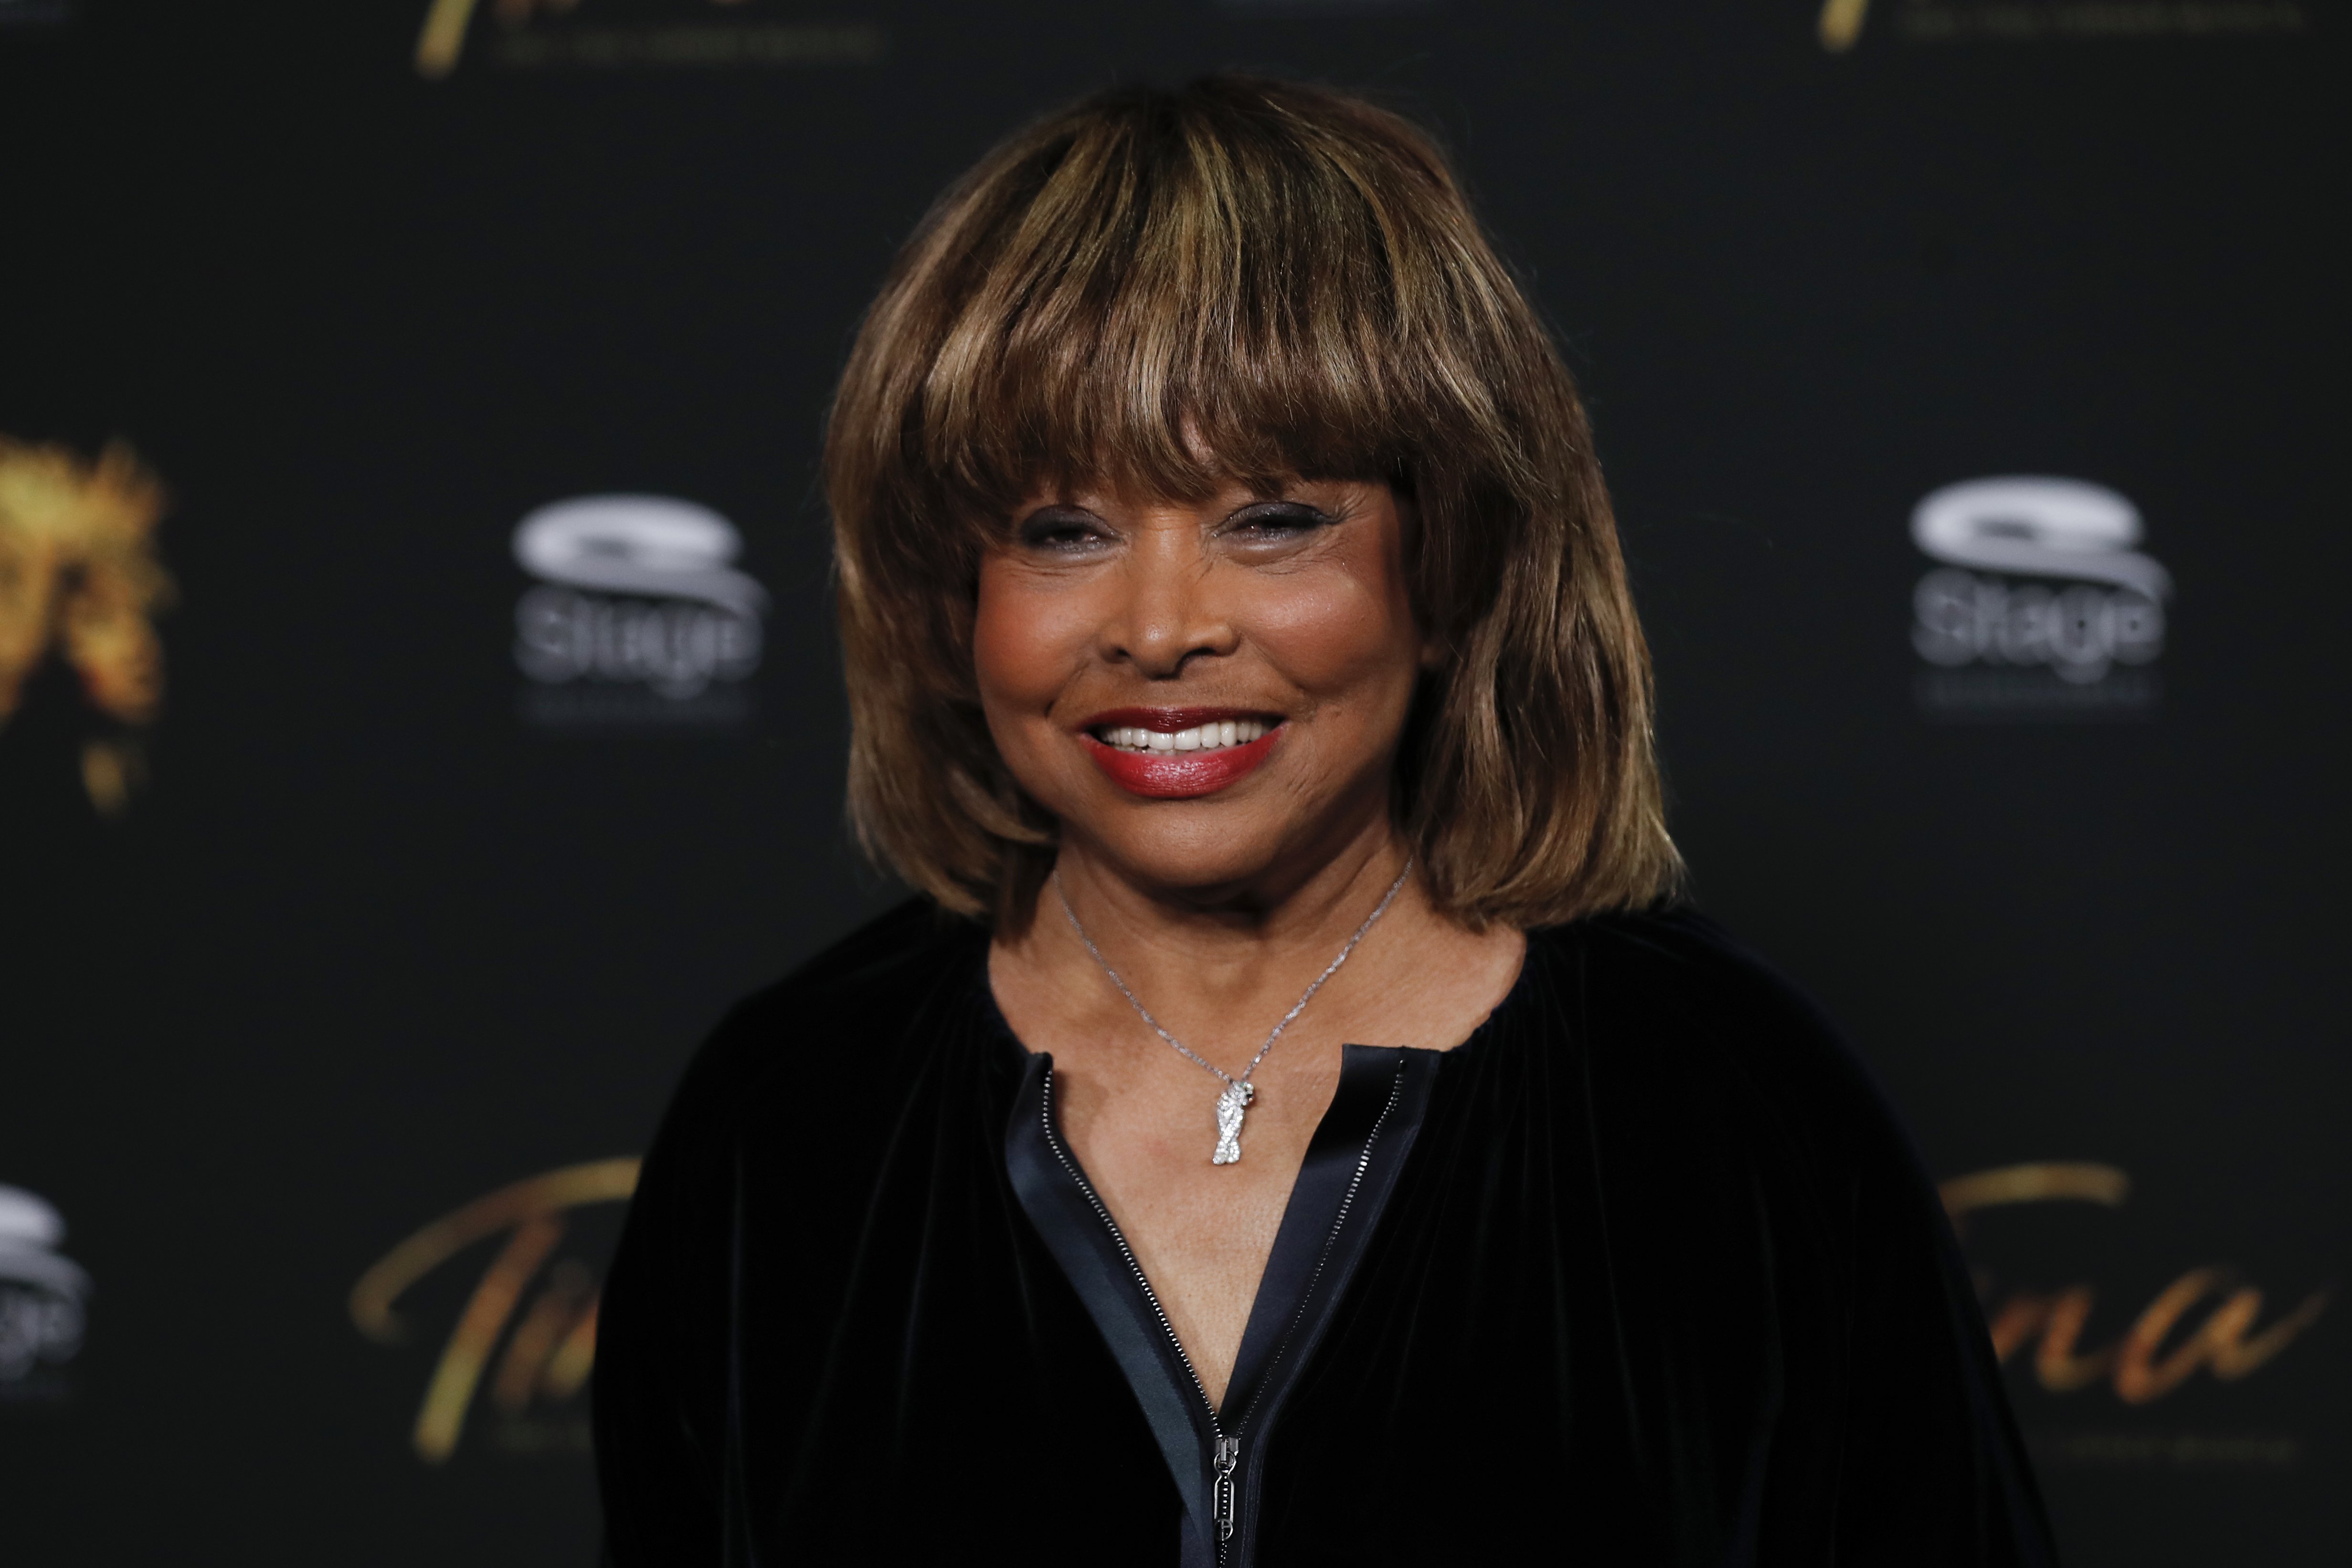 Tina Turner during a photo call for the musical 'Tina - Das Tina Turner Musical' at Mojo Club on October 23, 2018, in Hamburg, Germany. | Source: Getty Images